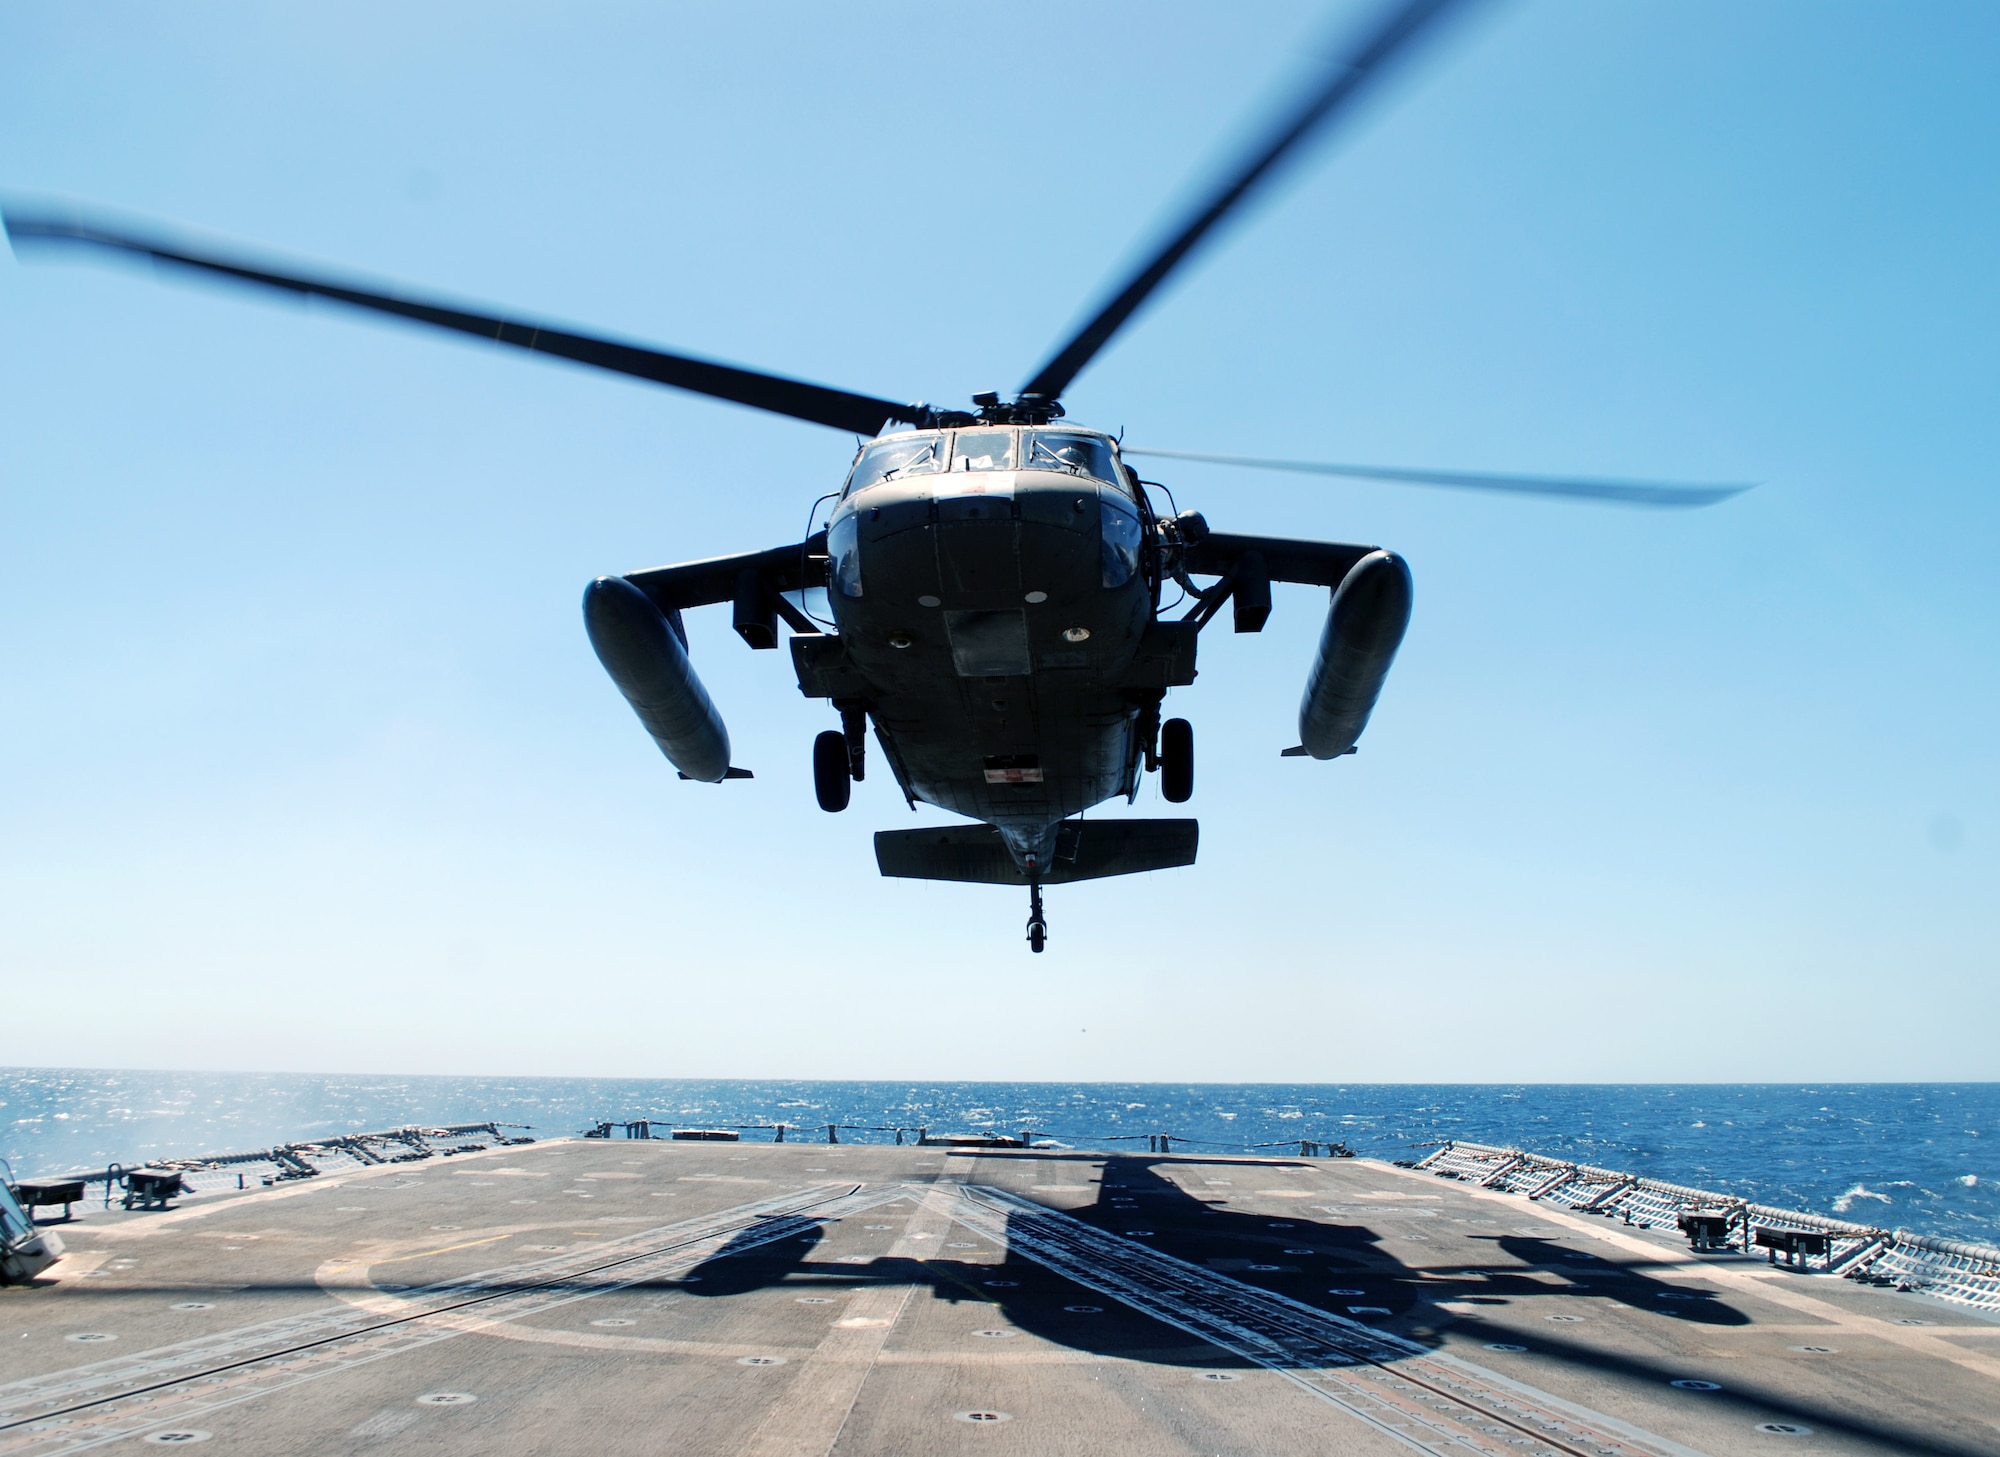 A UH-60 Blackhawk helicopter assigned to Joint Task Force Bravo's 1-228th Aviation Regiment comes in for a landing on the deck of the USS Rentz during deck landing qualification training off the coast of Honduras, Feb. 8, 2014. The training, which was conducted approximately 70 miles off the coast of Honduras, was done to qualify 1-228th pilots and crew chiefs on shipboard operations. (Courtesy photo)